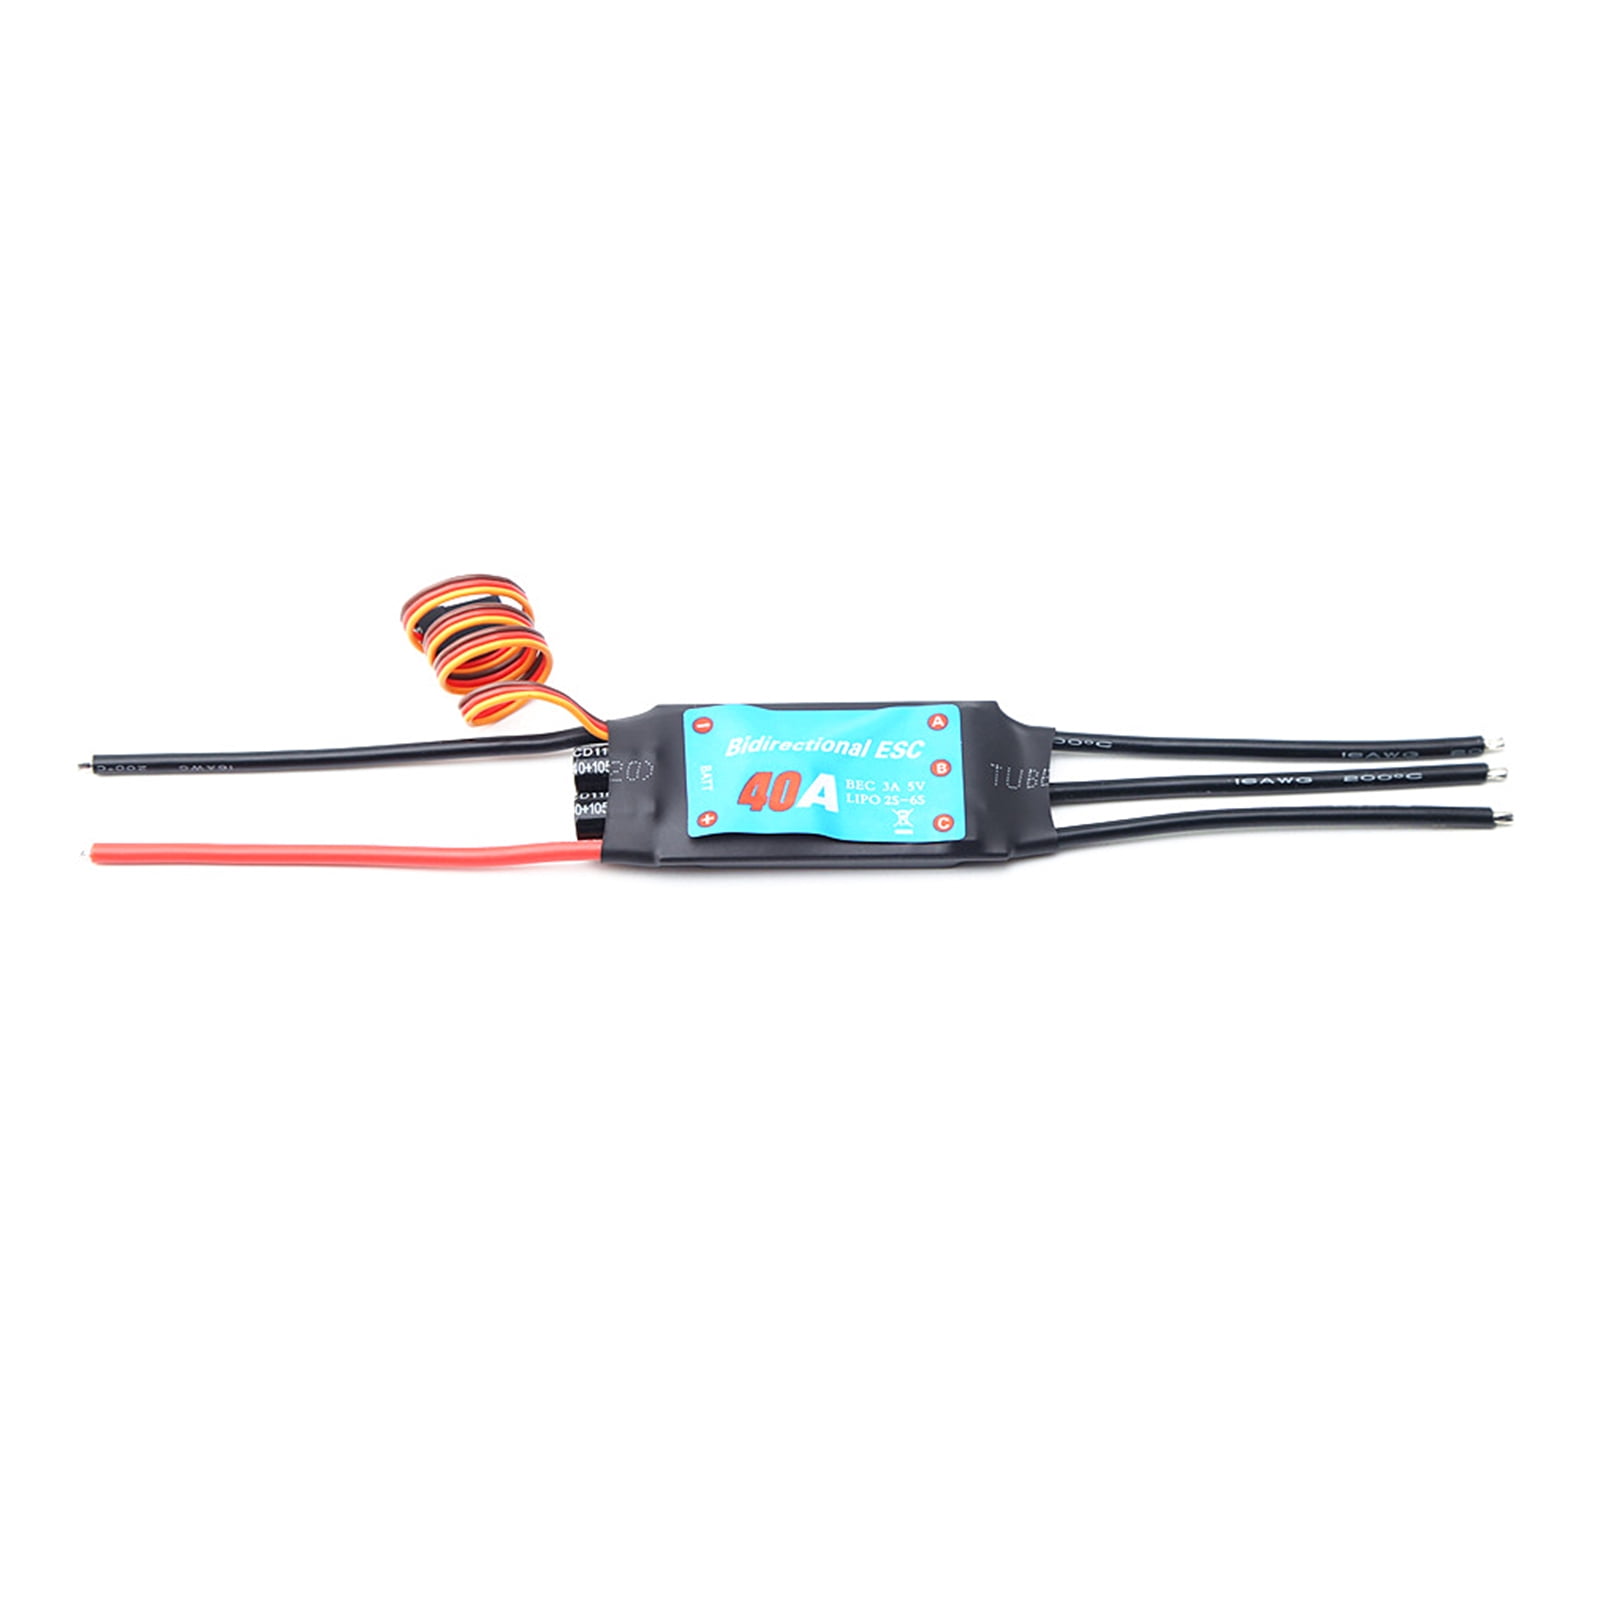 40A Brushless Speed Controller ESC Propellers RC Vehicle Speed Controller Parts 